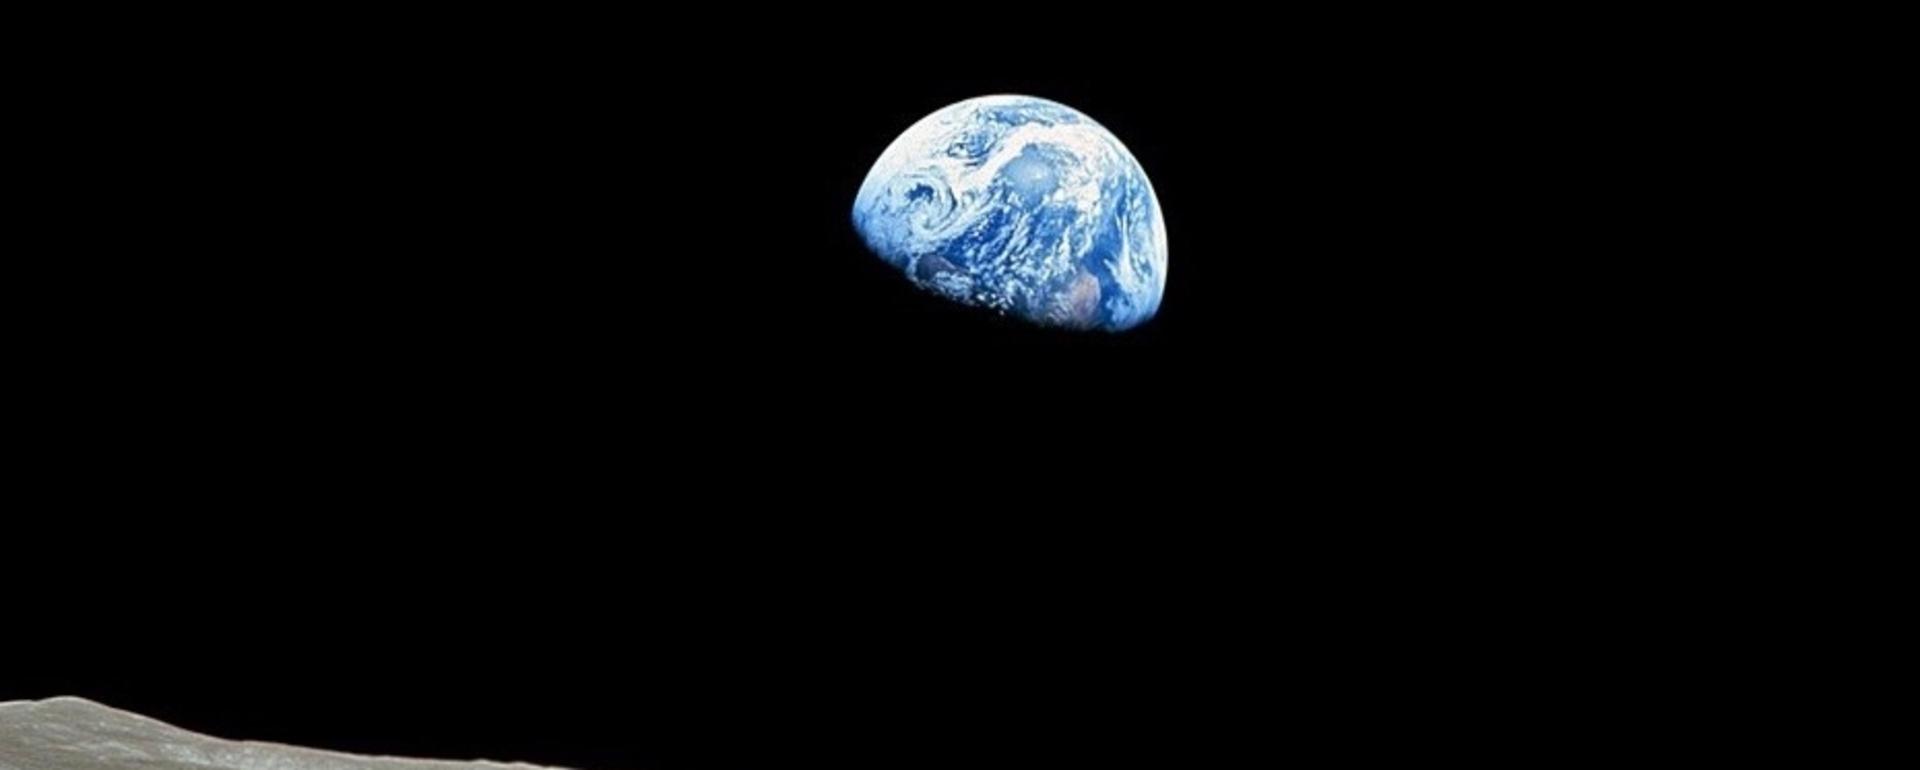 "Earthrise," a view from Apollo 8